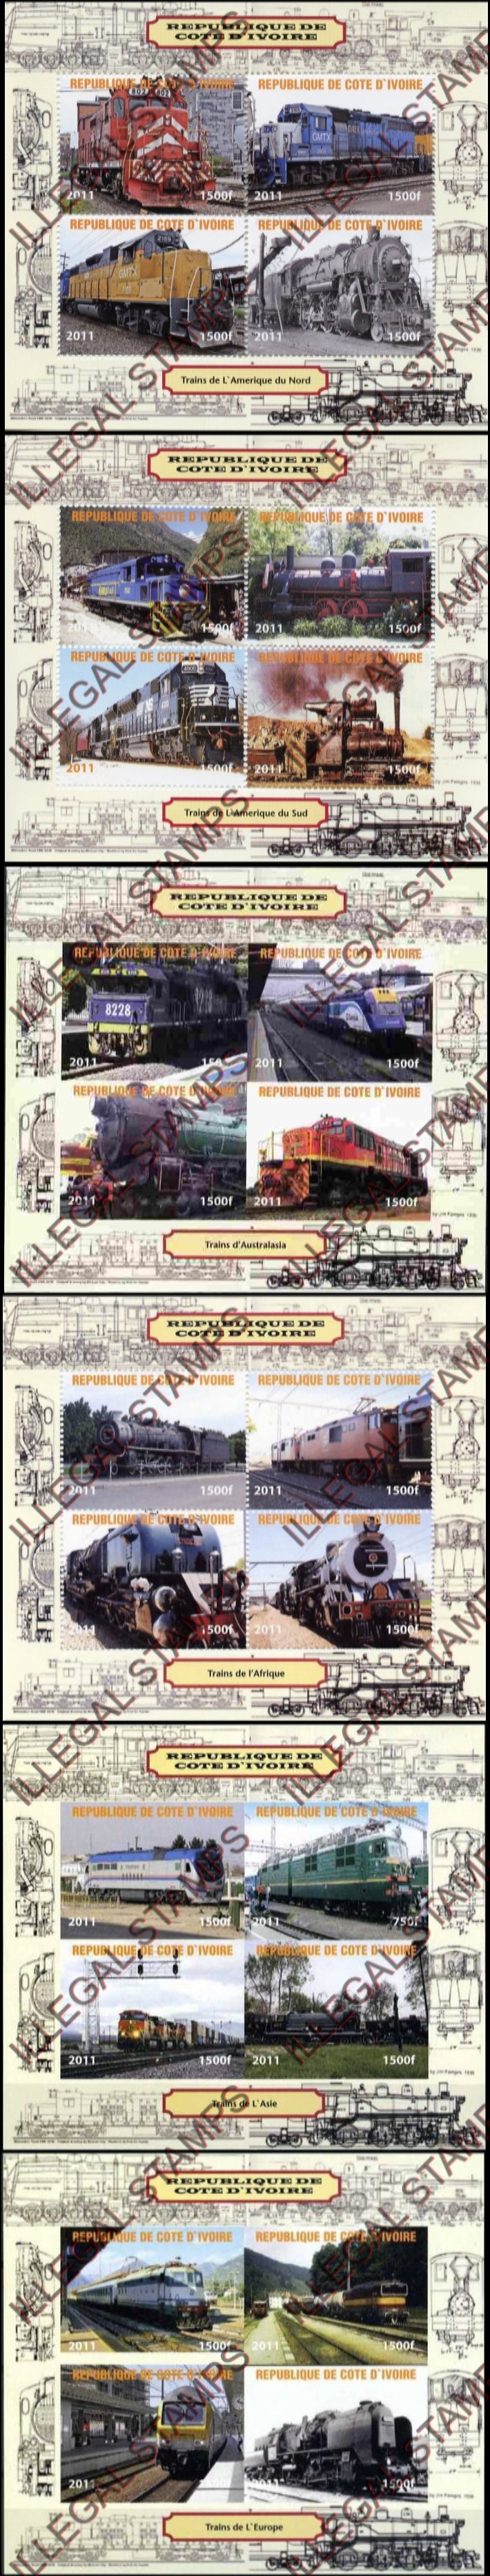 Ivory Coast 2011 Trains Illegal Stamp Souvenir Sheets of 4